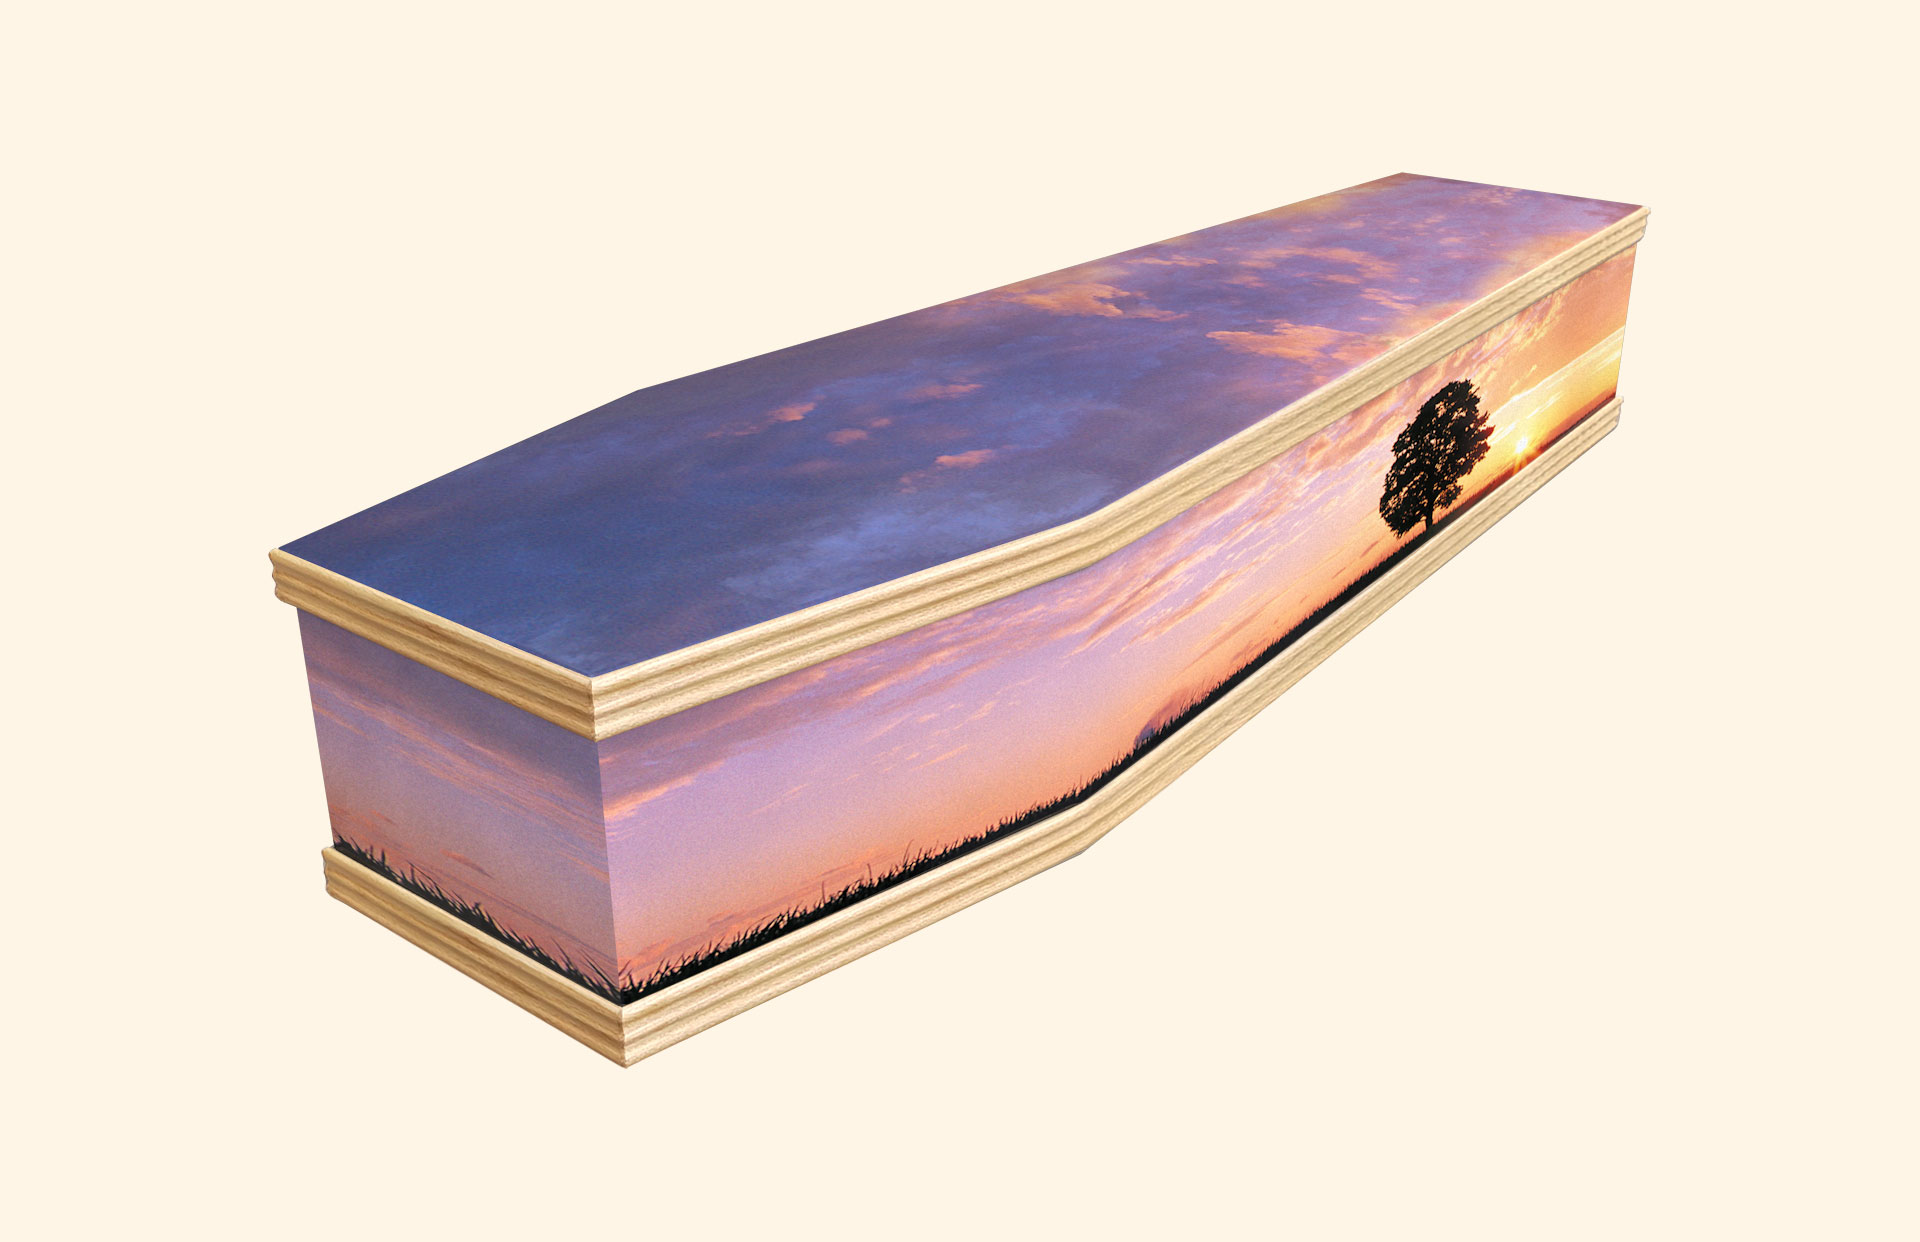 Sunset design on a classic coffin